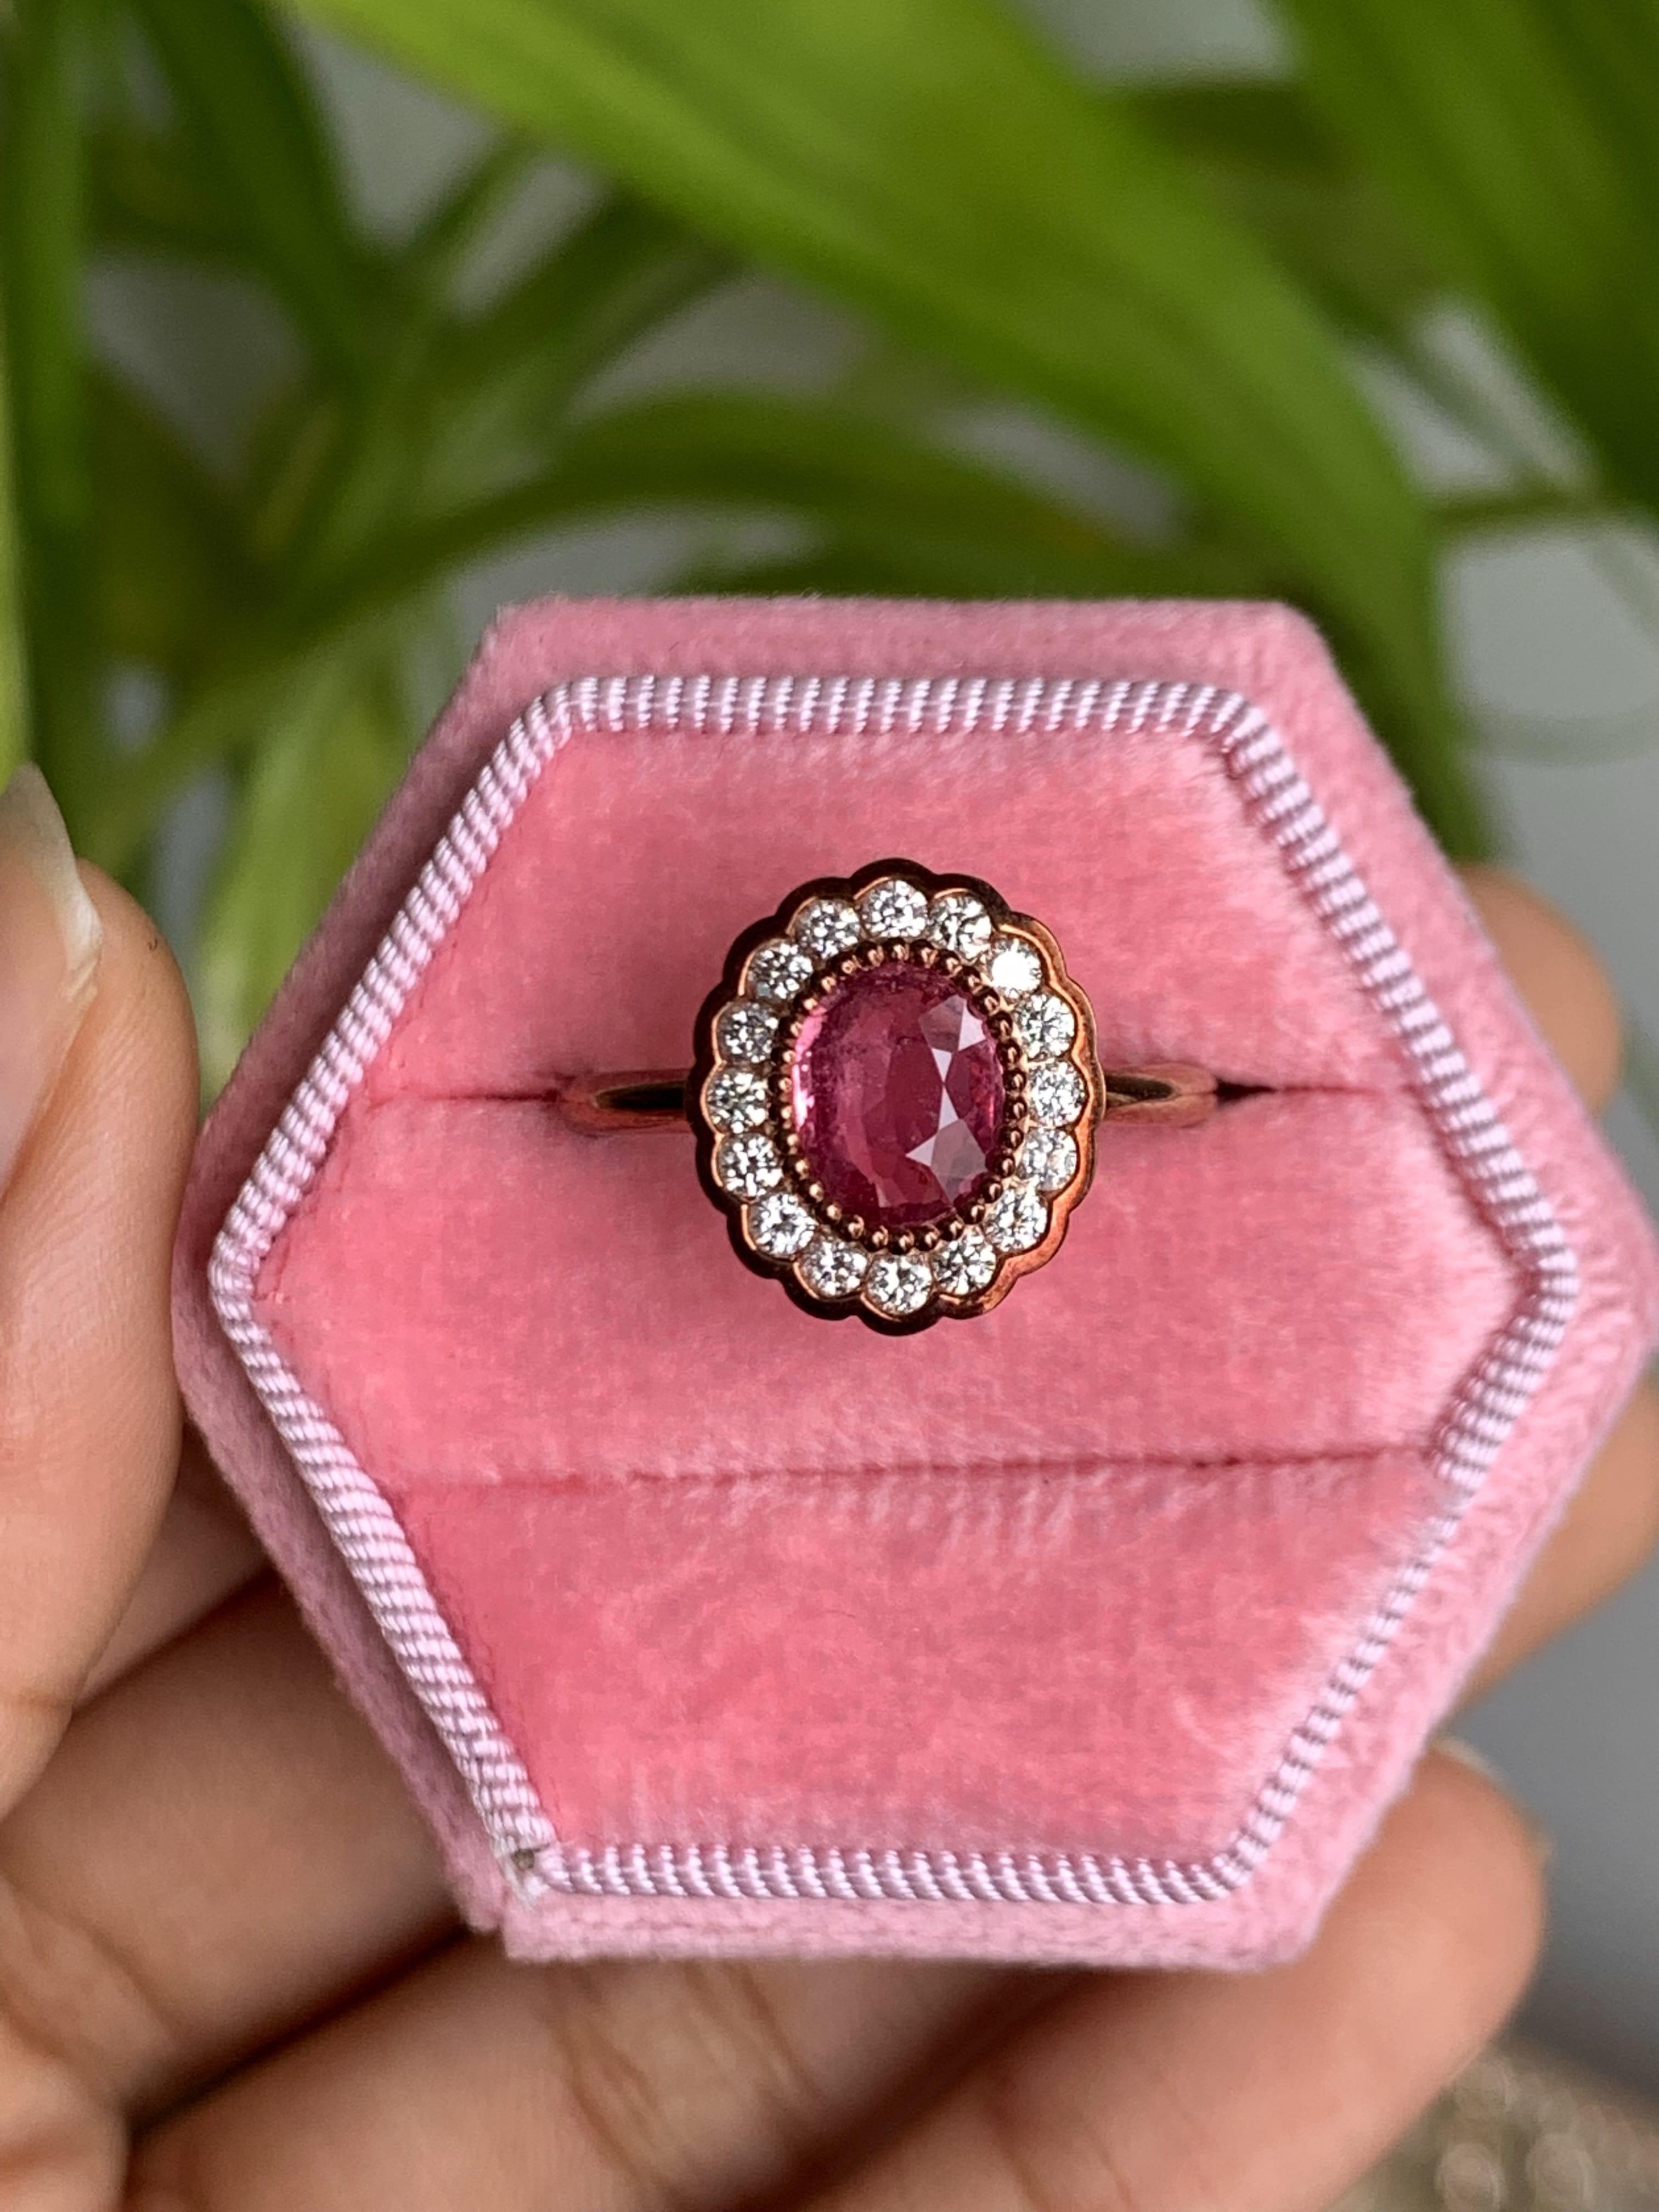 Prepare to be smitten by the sheer beauty of this absolutely fascinating Padparadscha Sapphire Ring. From the moment you lay your eyes on it, you'll fall head over heels in love. Originating from Madagascar, this oval-shaped Padparadscha Sapphire